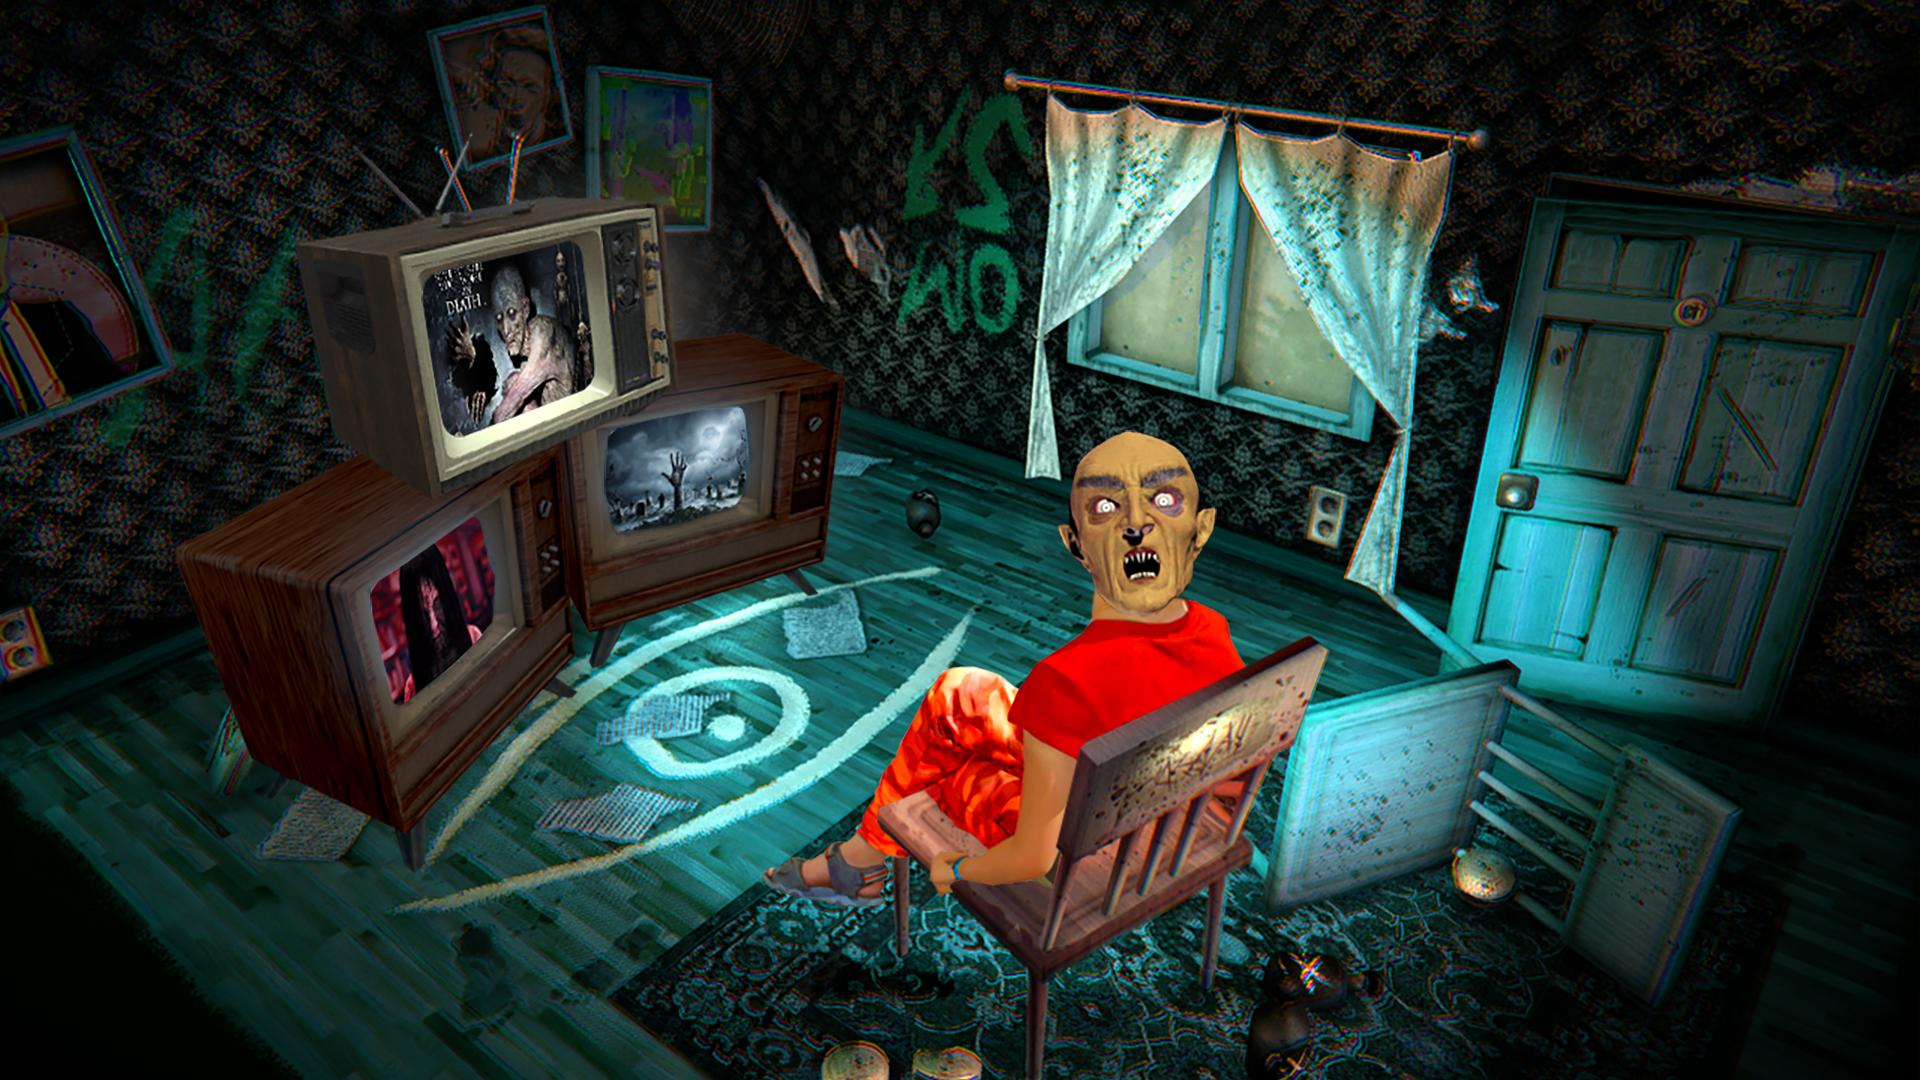 Scary Ghost House 3d. Хоррор игра про мягкую игрушку в Рождество. Scary House. Scary house 2 прохождение